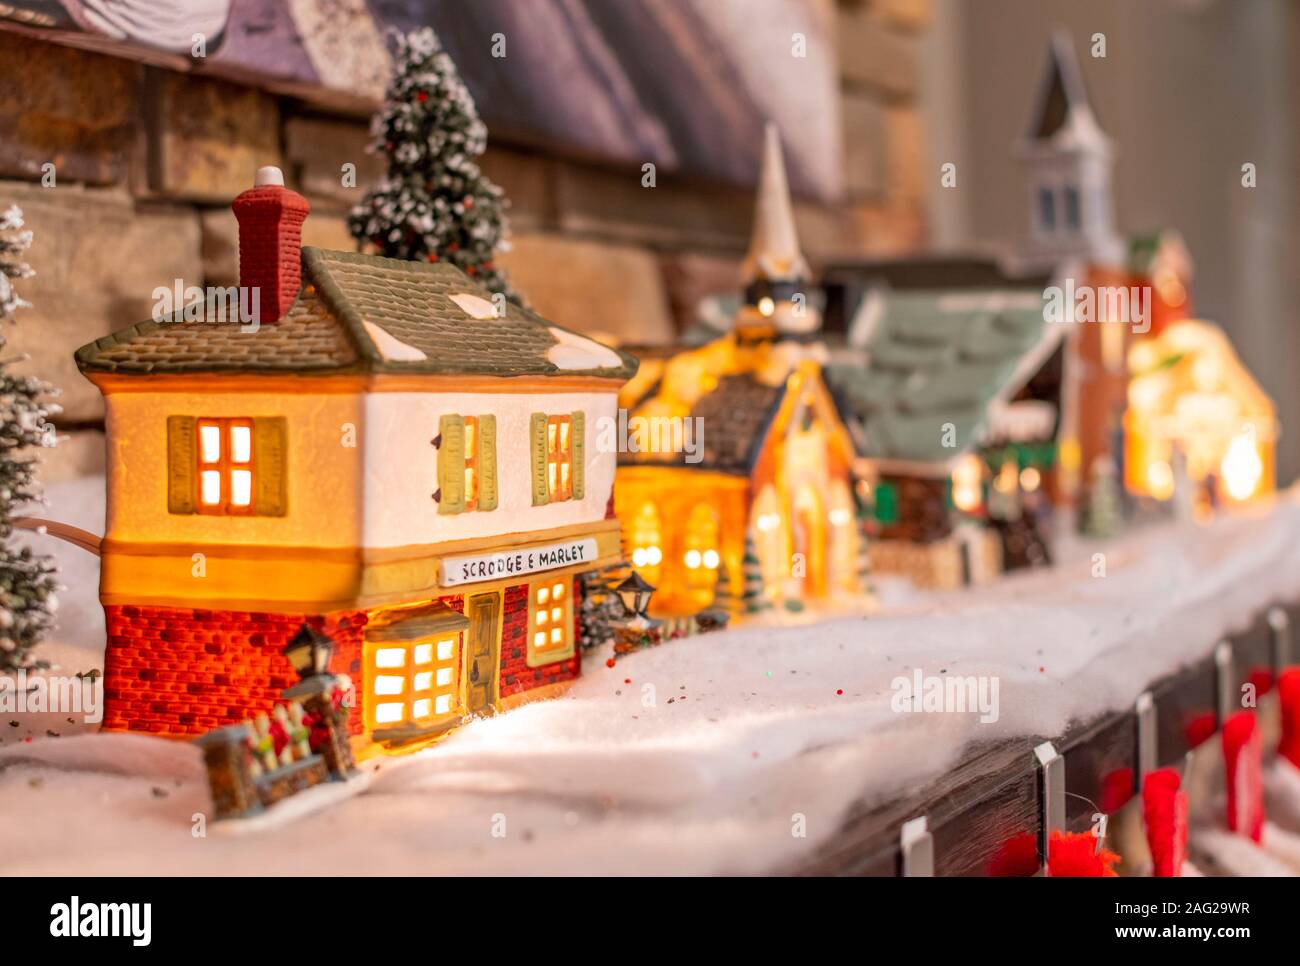 A miniature, illuminated Victorian Christmas village of shops and businesses, including a Scrooge and Marley building, on a mantel during the holidays Stock Photo